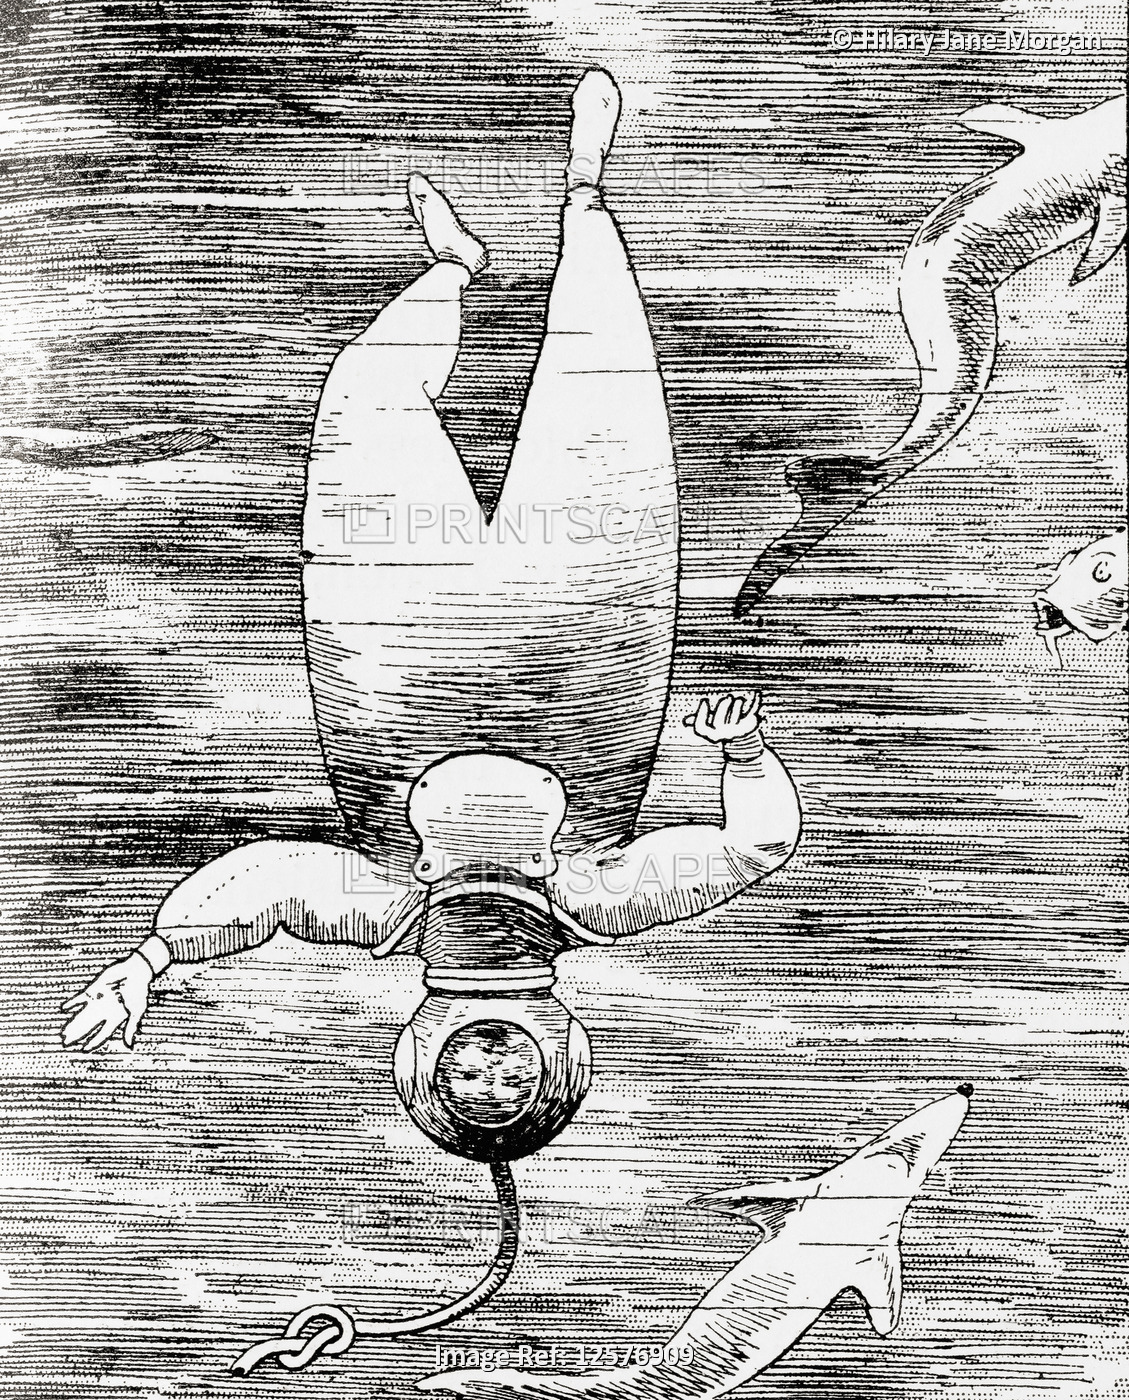 A deep sea diver in thge 19th century.   From The Strand Magazine, published ...